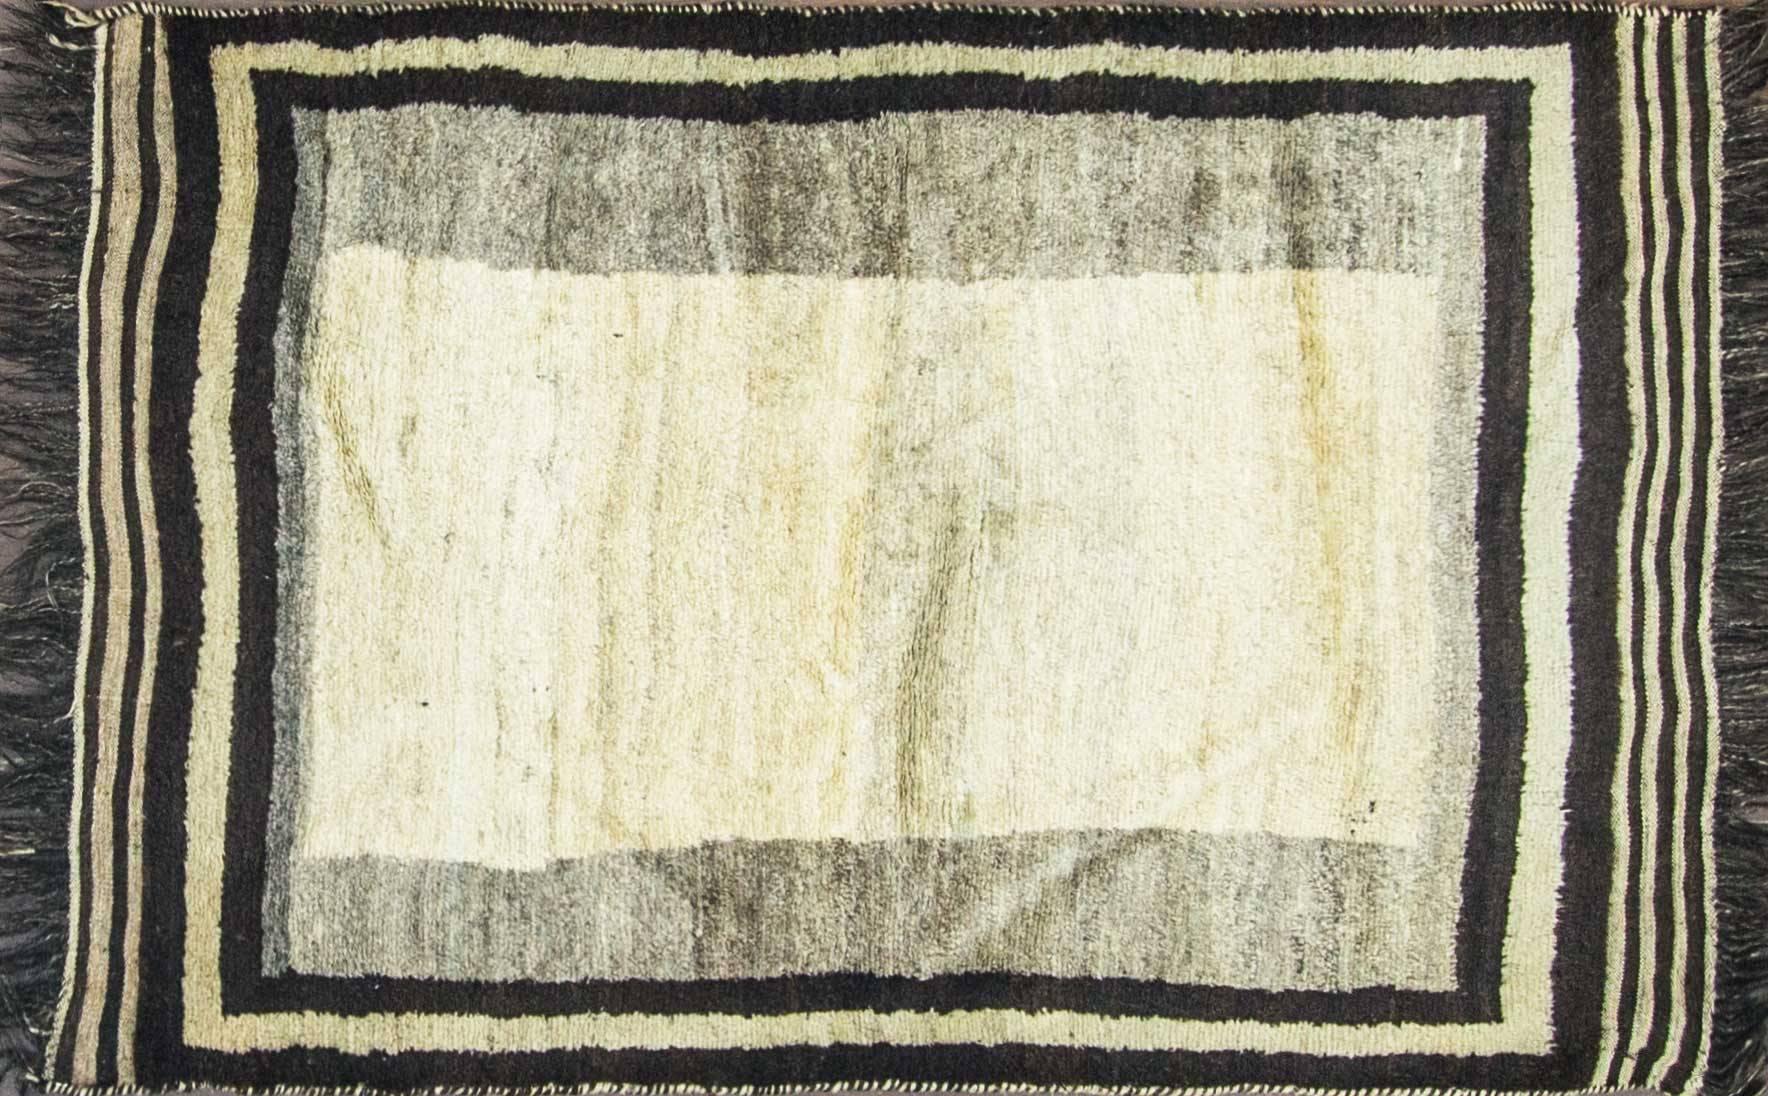 The rich silky wool and the minimal designs have inspired countless rug lovers. The late 19th century gabbeh rugs were woven by tribal weavers who live in the majestic Zagros Mountains. This mountain range (the largest in Iran) rises up to nearly